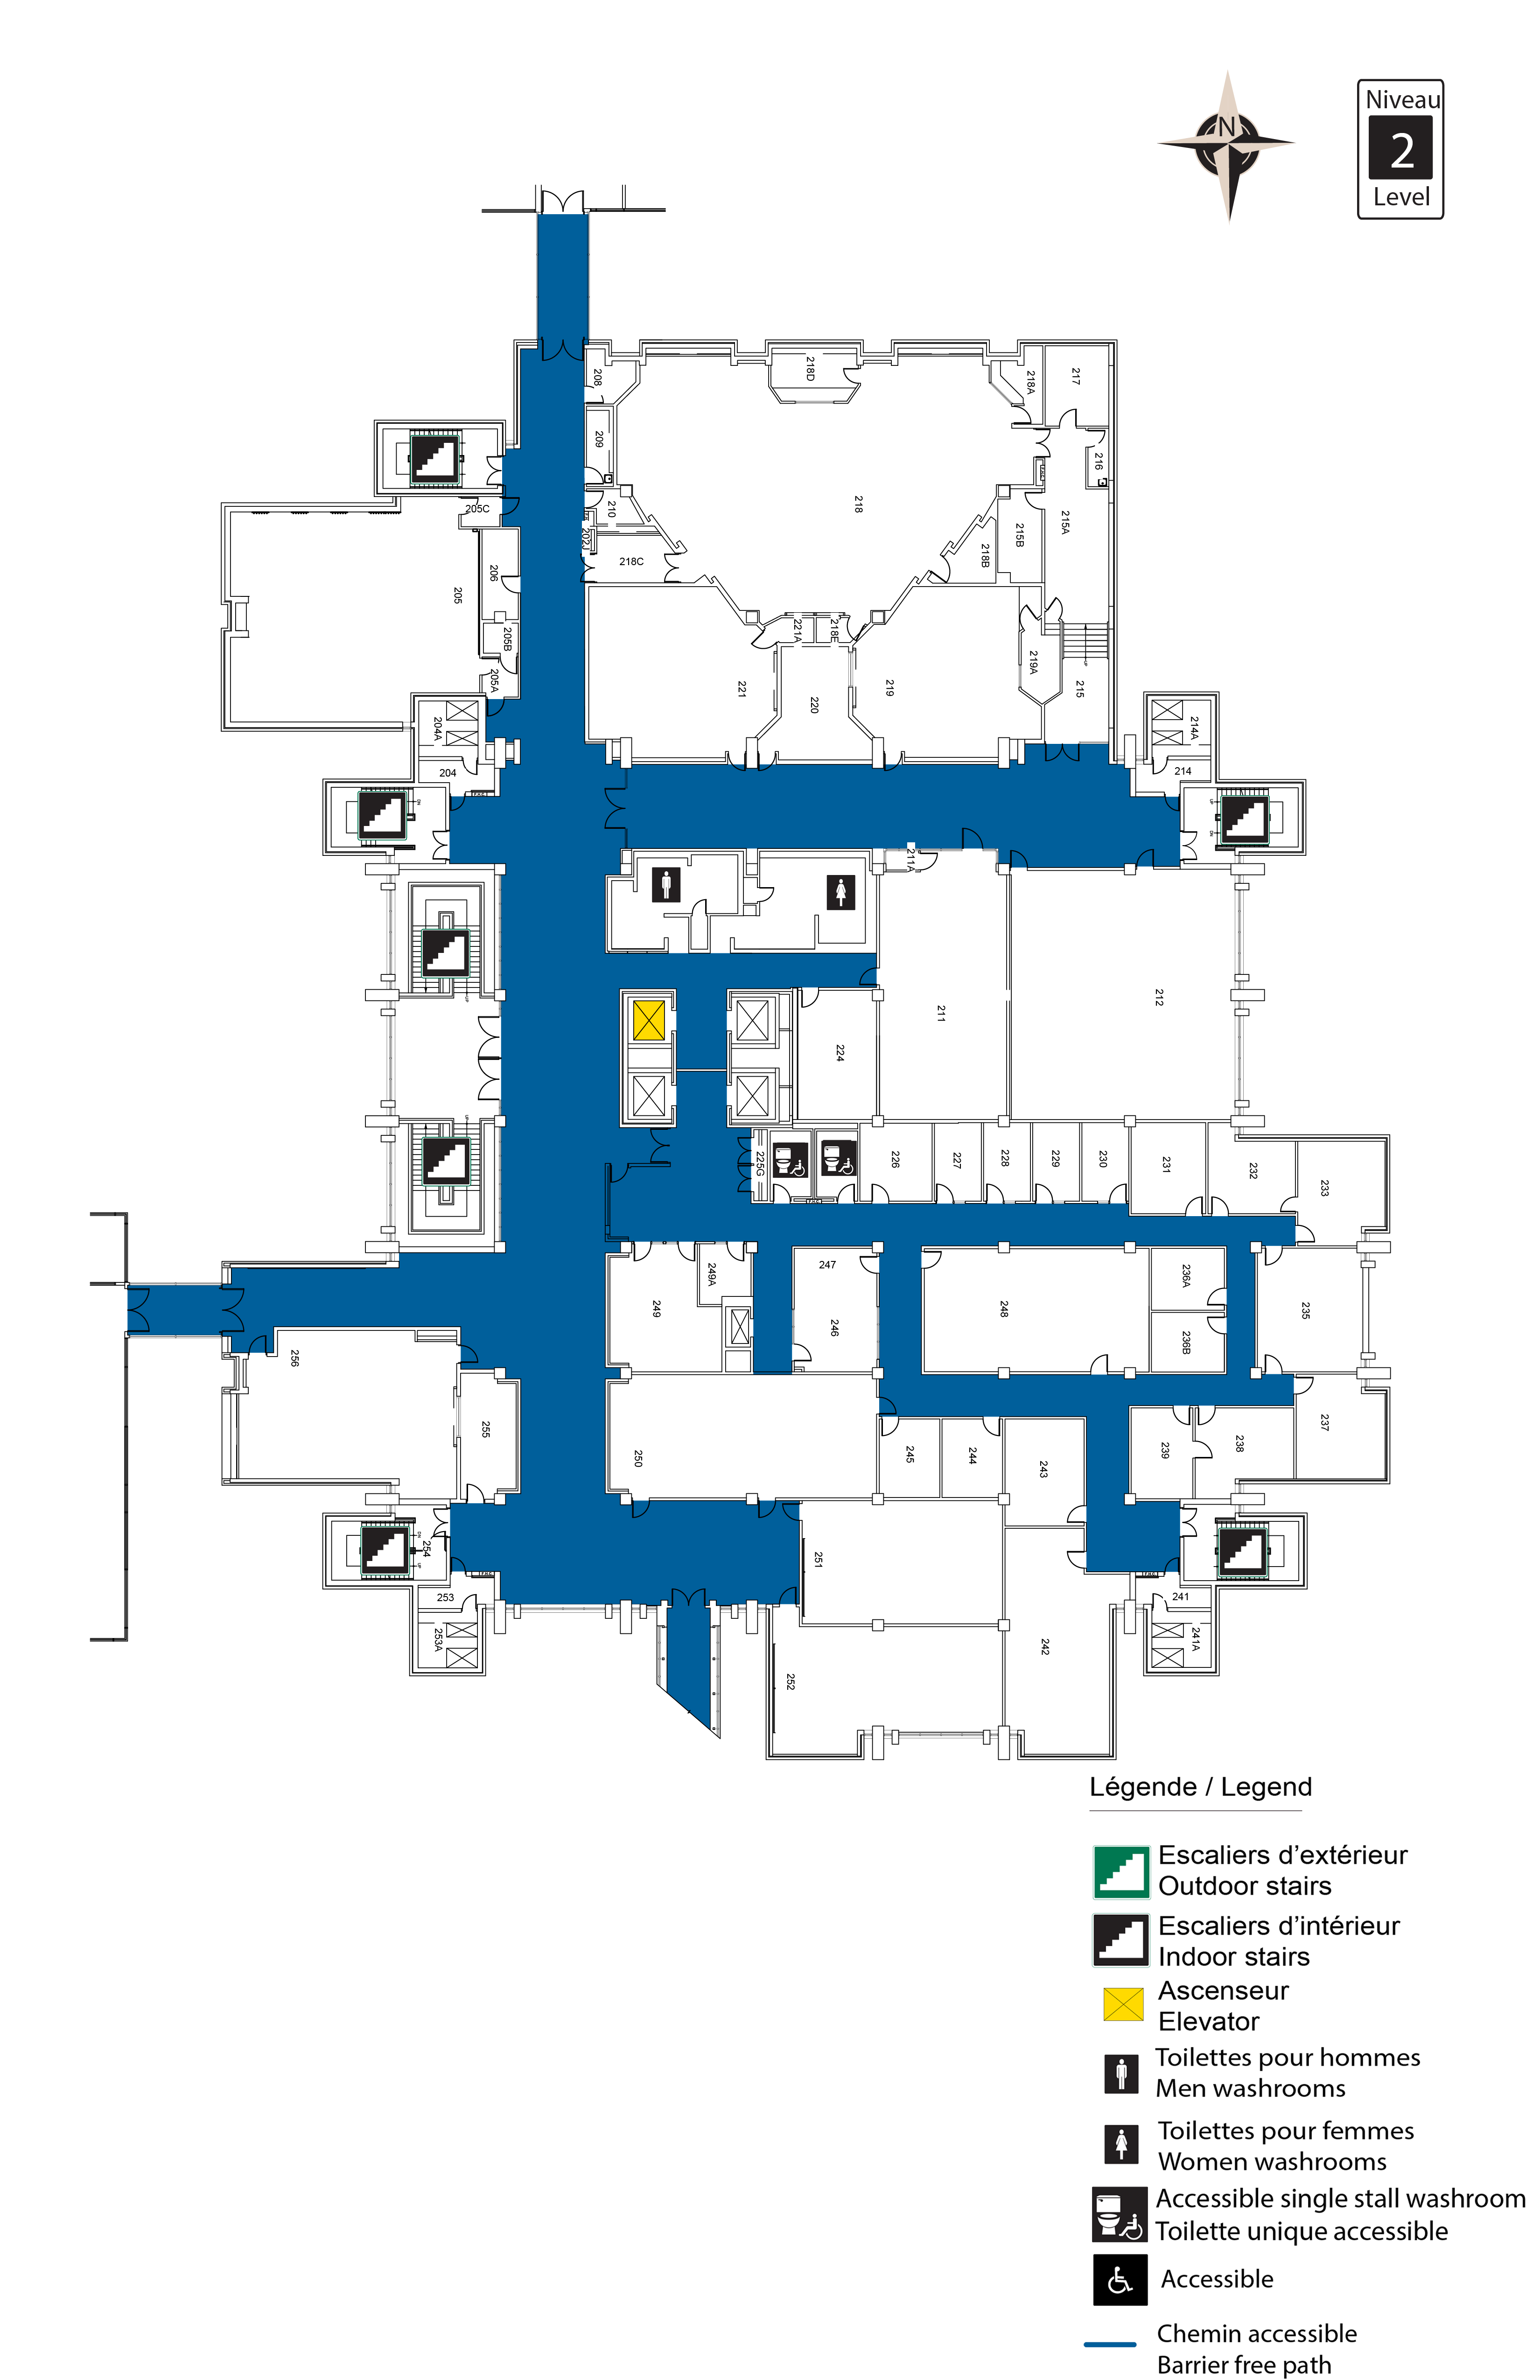 Accessible map of Morisset level 2